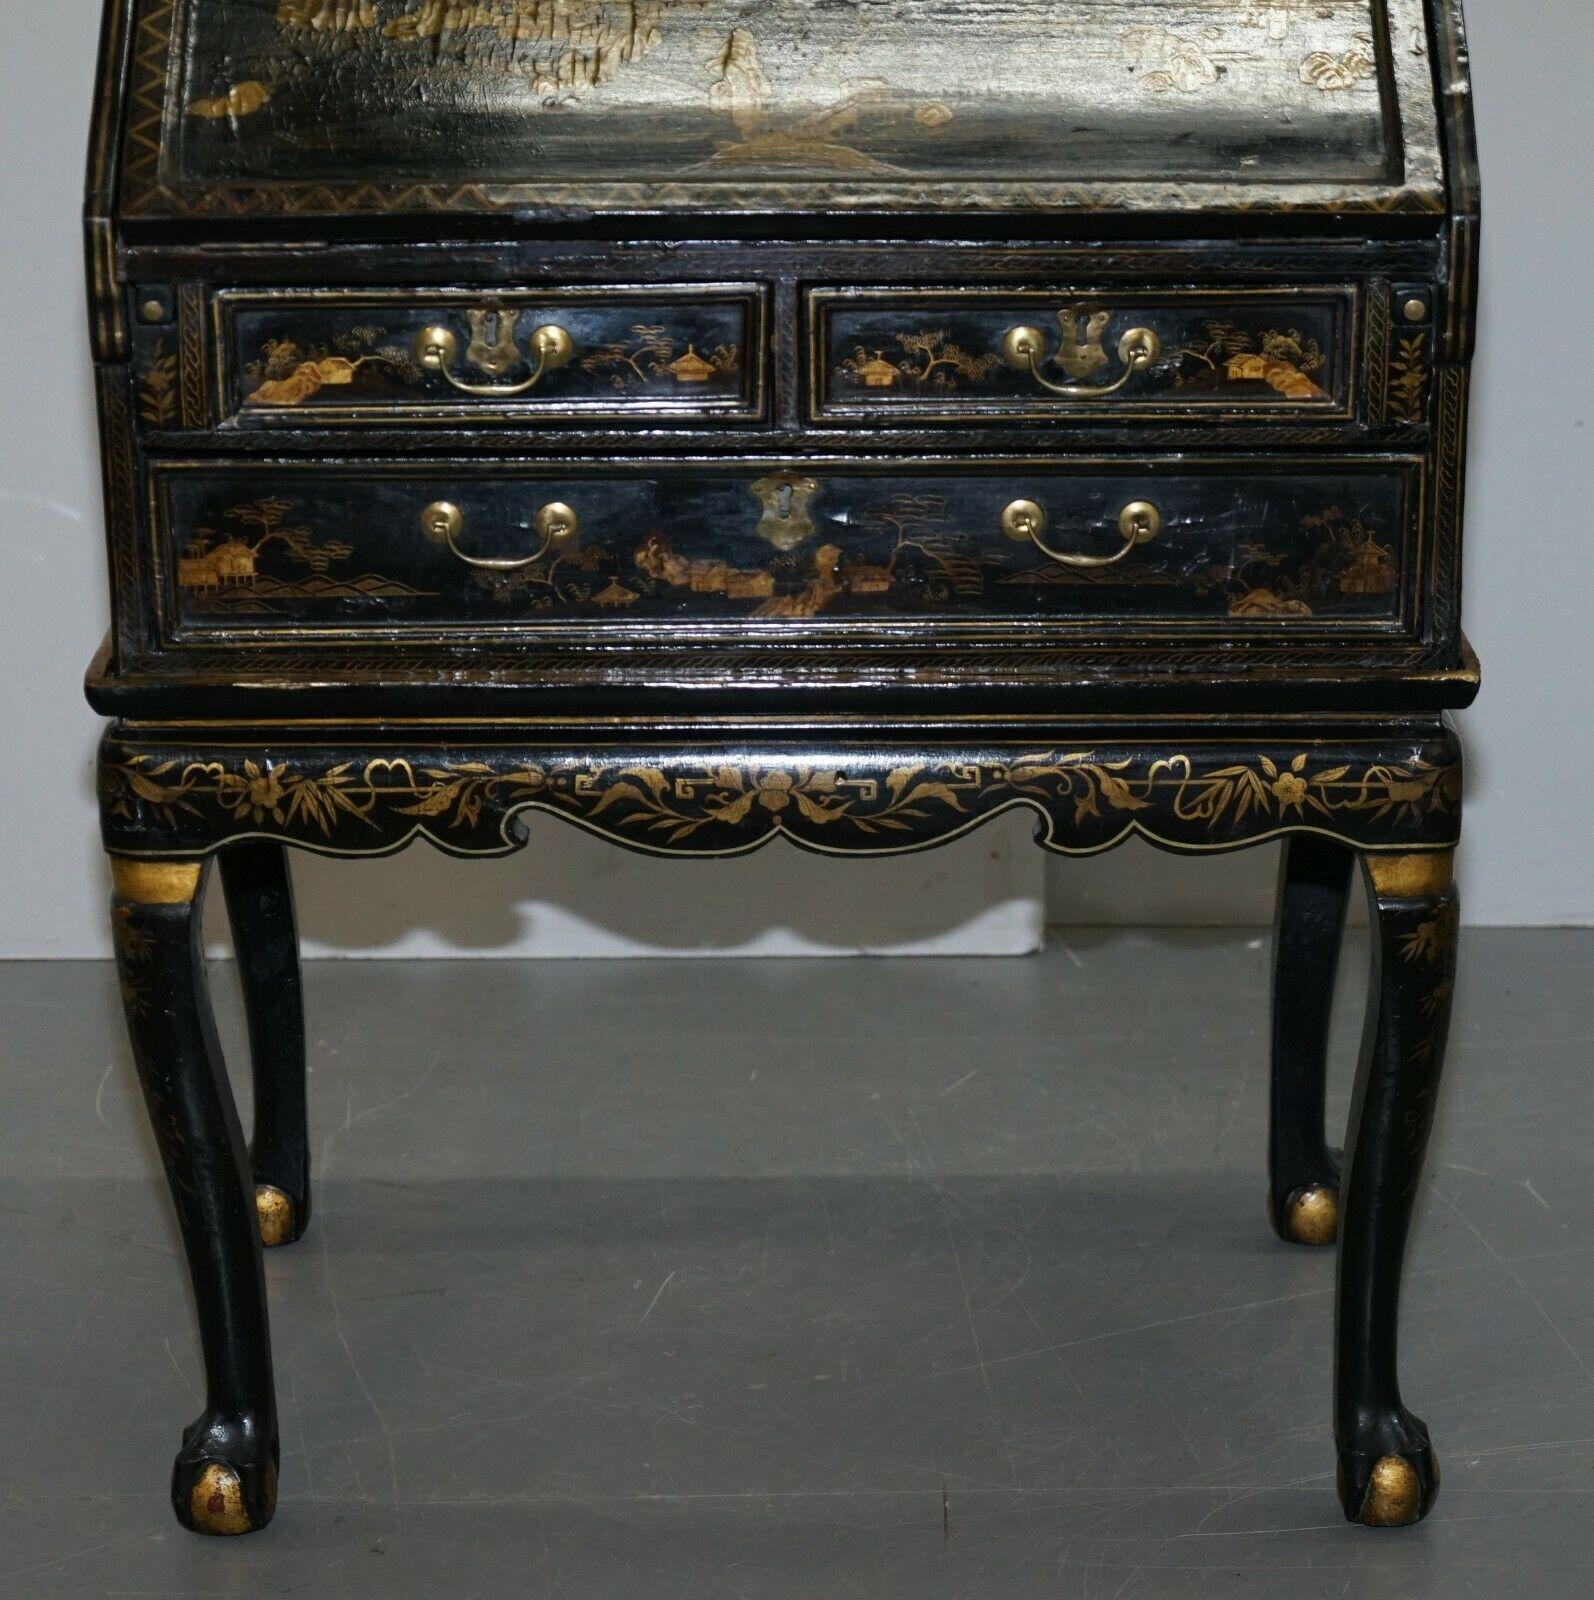 Lacquered Antique Queen Anne English Japanned Lacquer Writing Bureau Desk Claw & Ball Feet